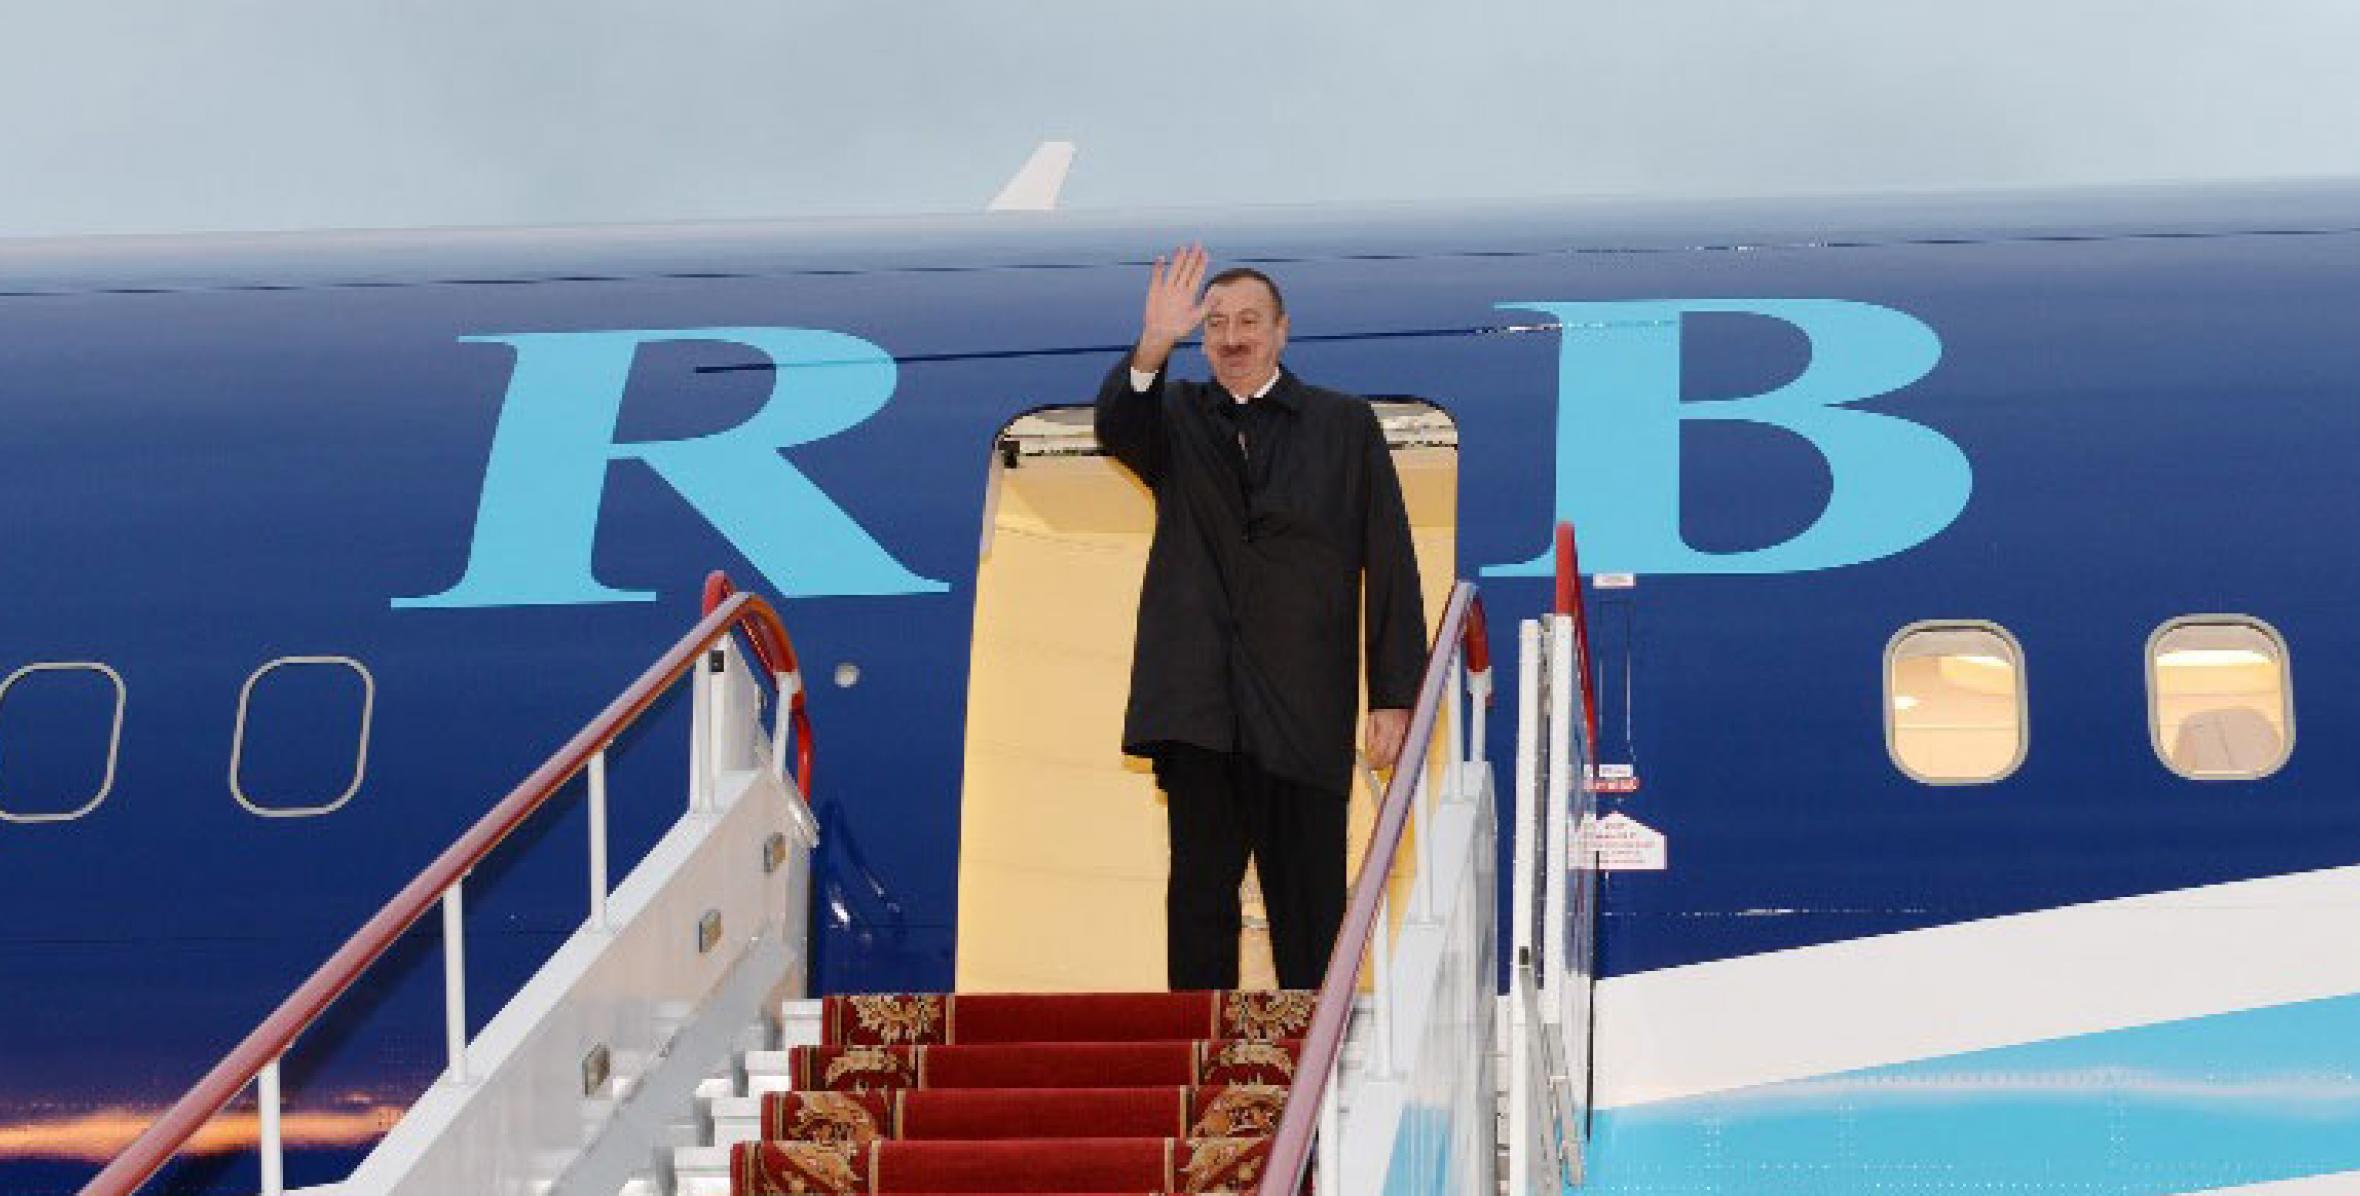 Ilham Aliyev’s visit to the Republic of Belarus ended